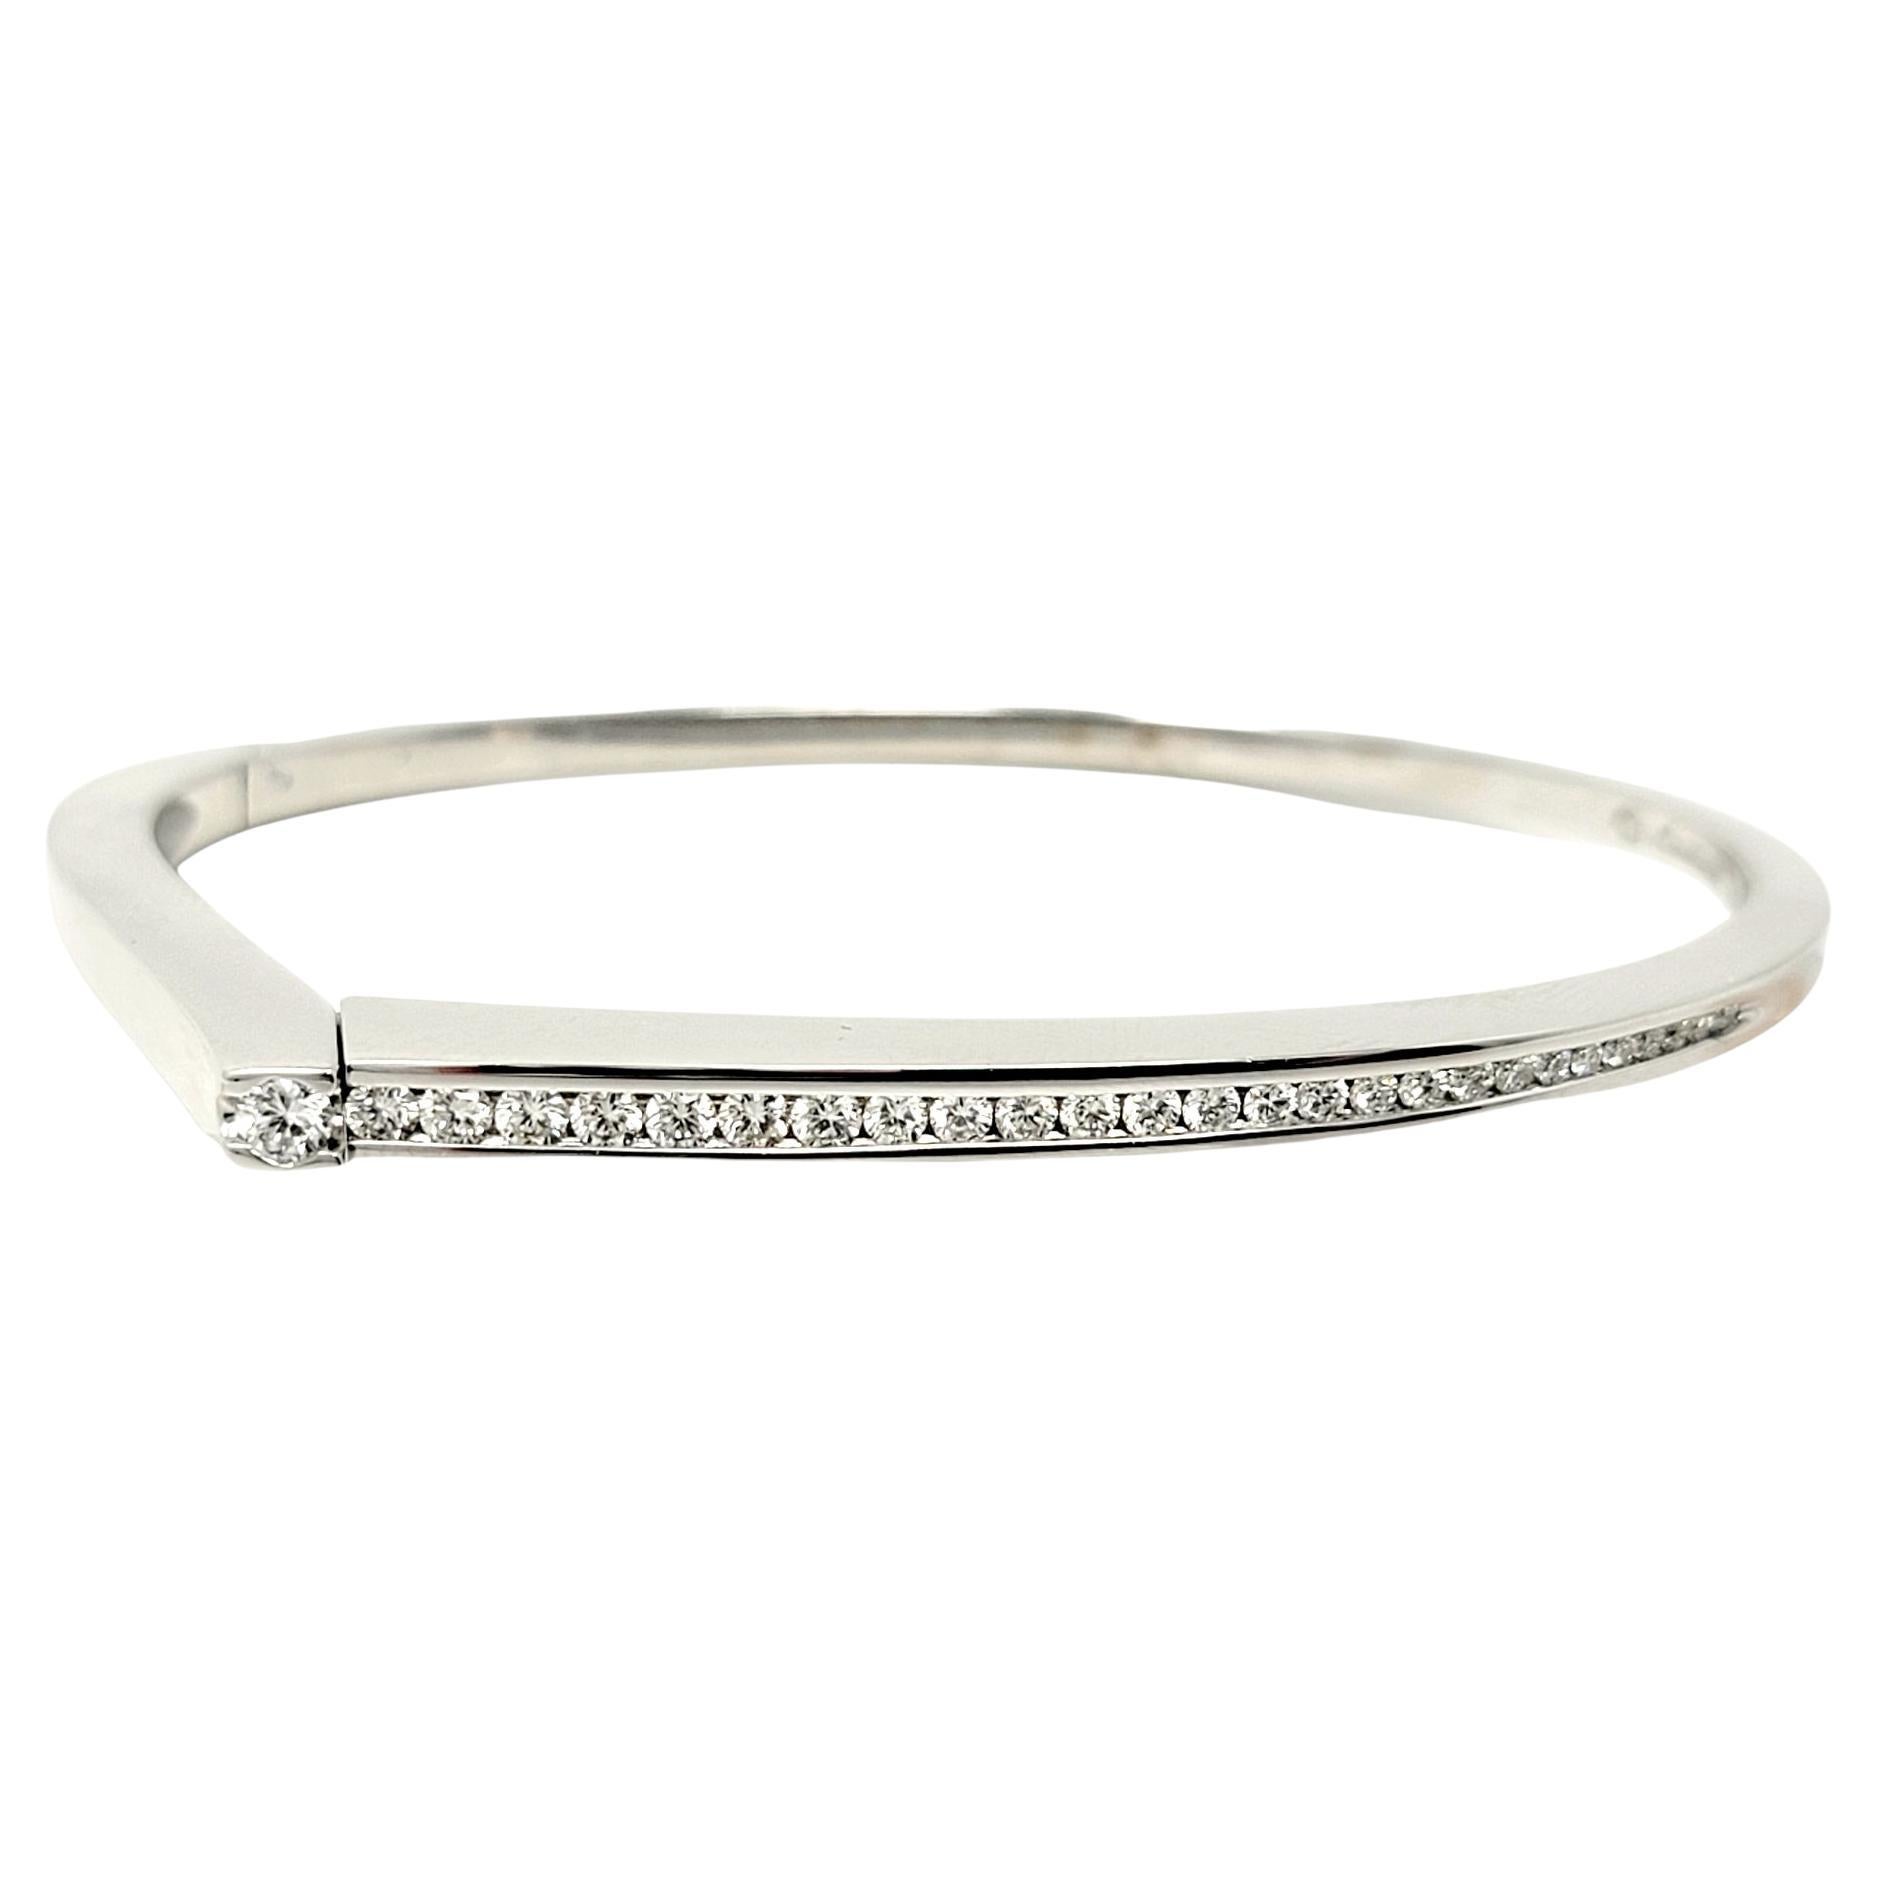 Stunningly sleek contemporary diamond bangle bracelet handmade by French jewelry designer, Pascal Lacroix. Part of his Riviera collection, this elegant bracelet absolutely shines on the wrist, sparkling from every angle. The 27 graduated natural